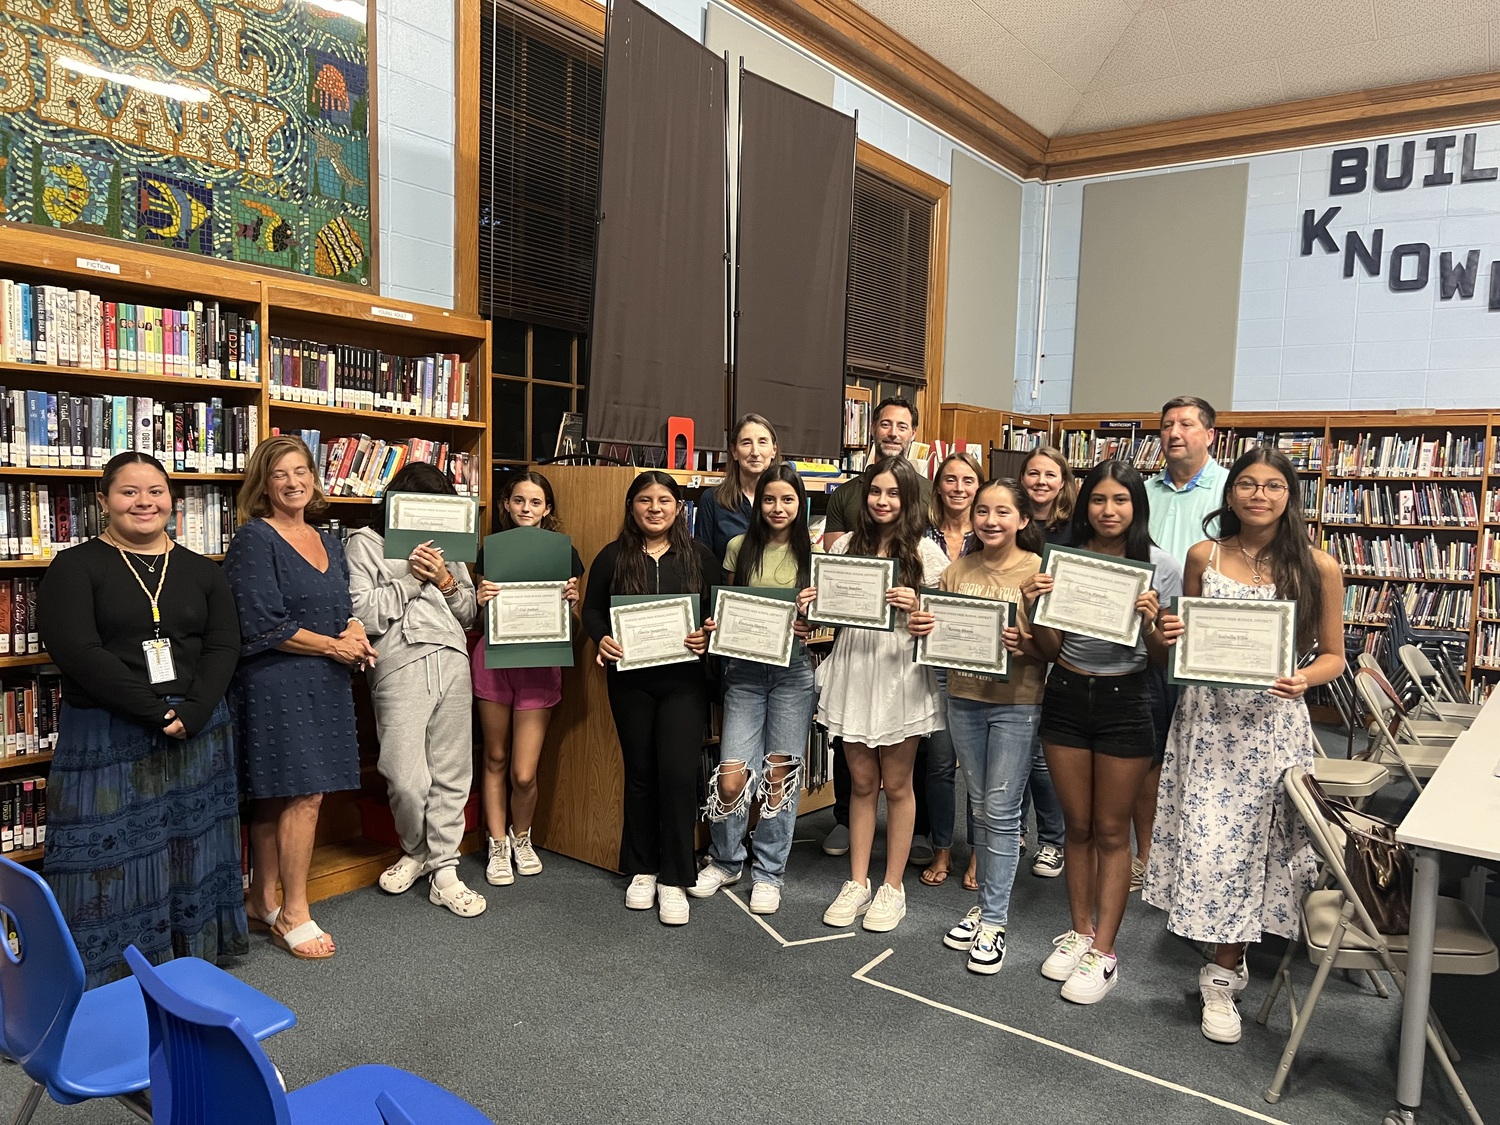 Theresa Roden and the i-tri girls organization, which builds self-esteem among adolescent girls, were recognized at a recent meeting of the Springs Board of Education. COURTESY SPRINGS SCHOOL